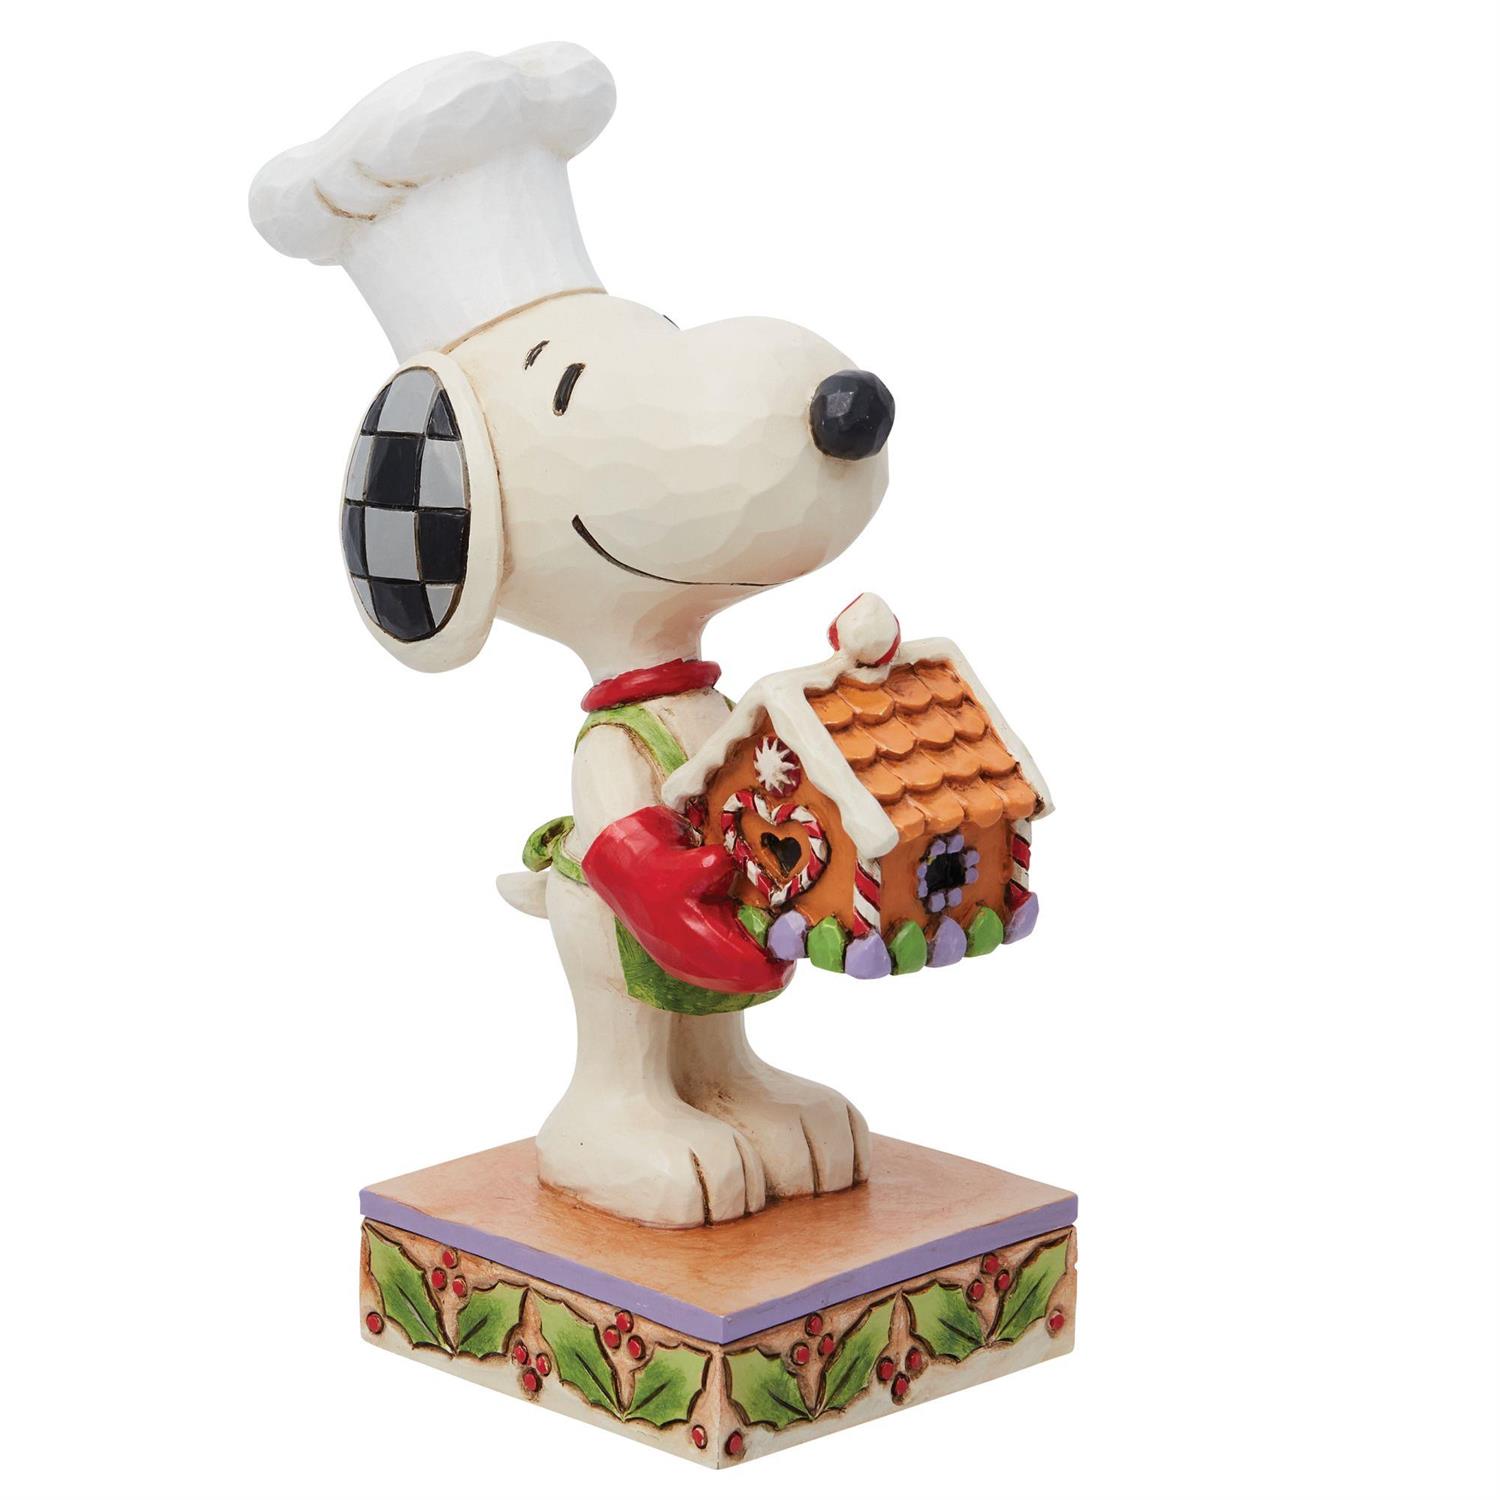 Enesco Gifts Jim Shore Peanuts Charlie Brown Snoopy With Gingerbread House Figurine Free Shipping Iveys Gifts And Decor